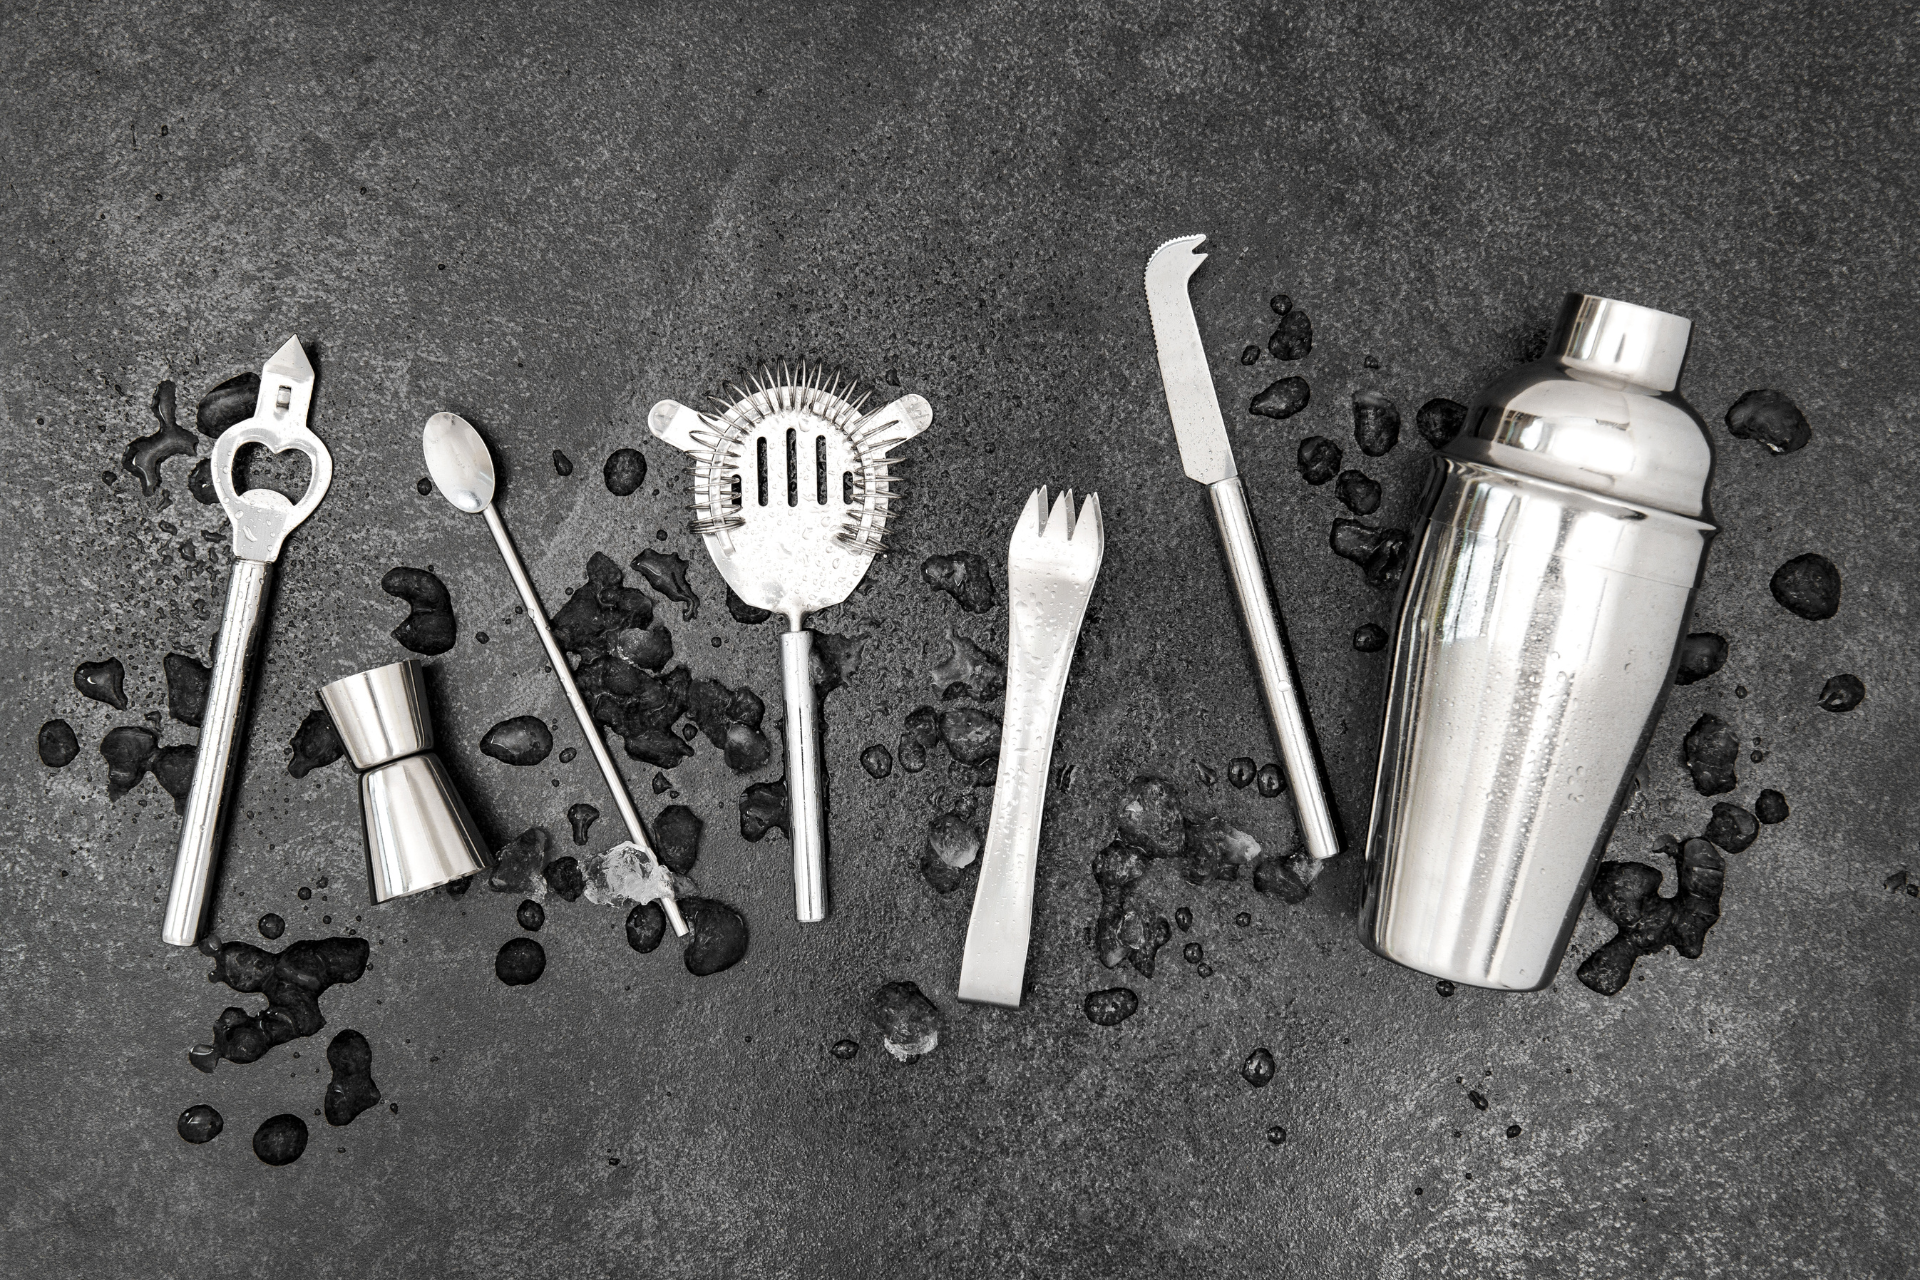 A stainless steel shaker set